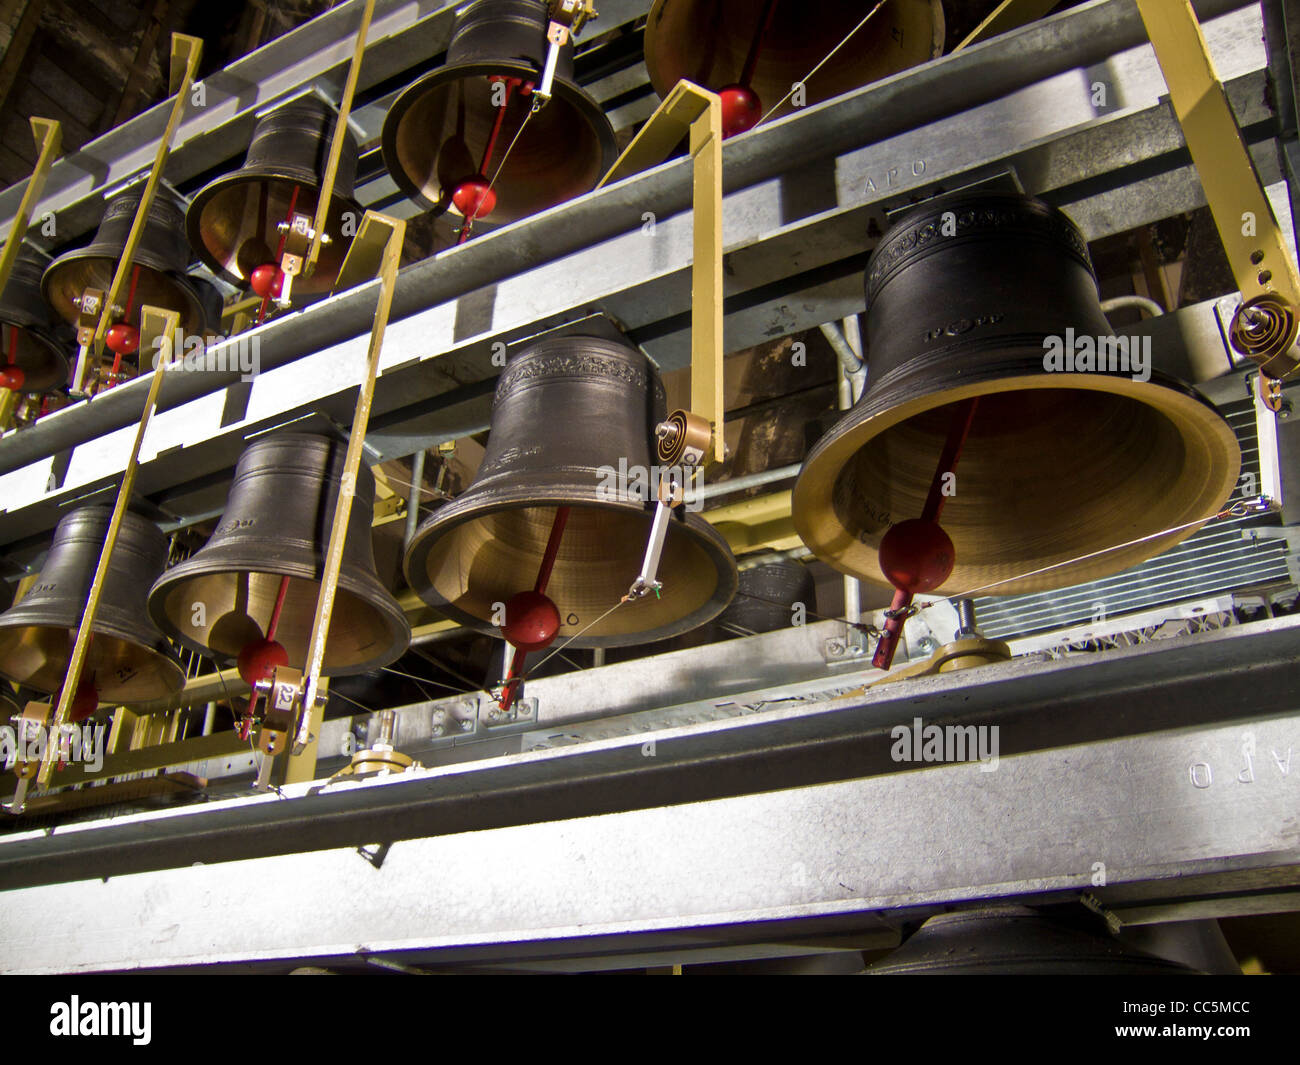 Carillon, 35 bells played by one person using the klavier keyboard at York Minster, UK Stock Photo